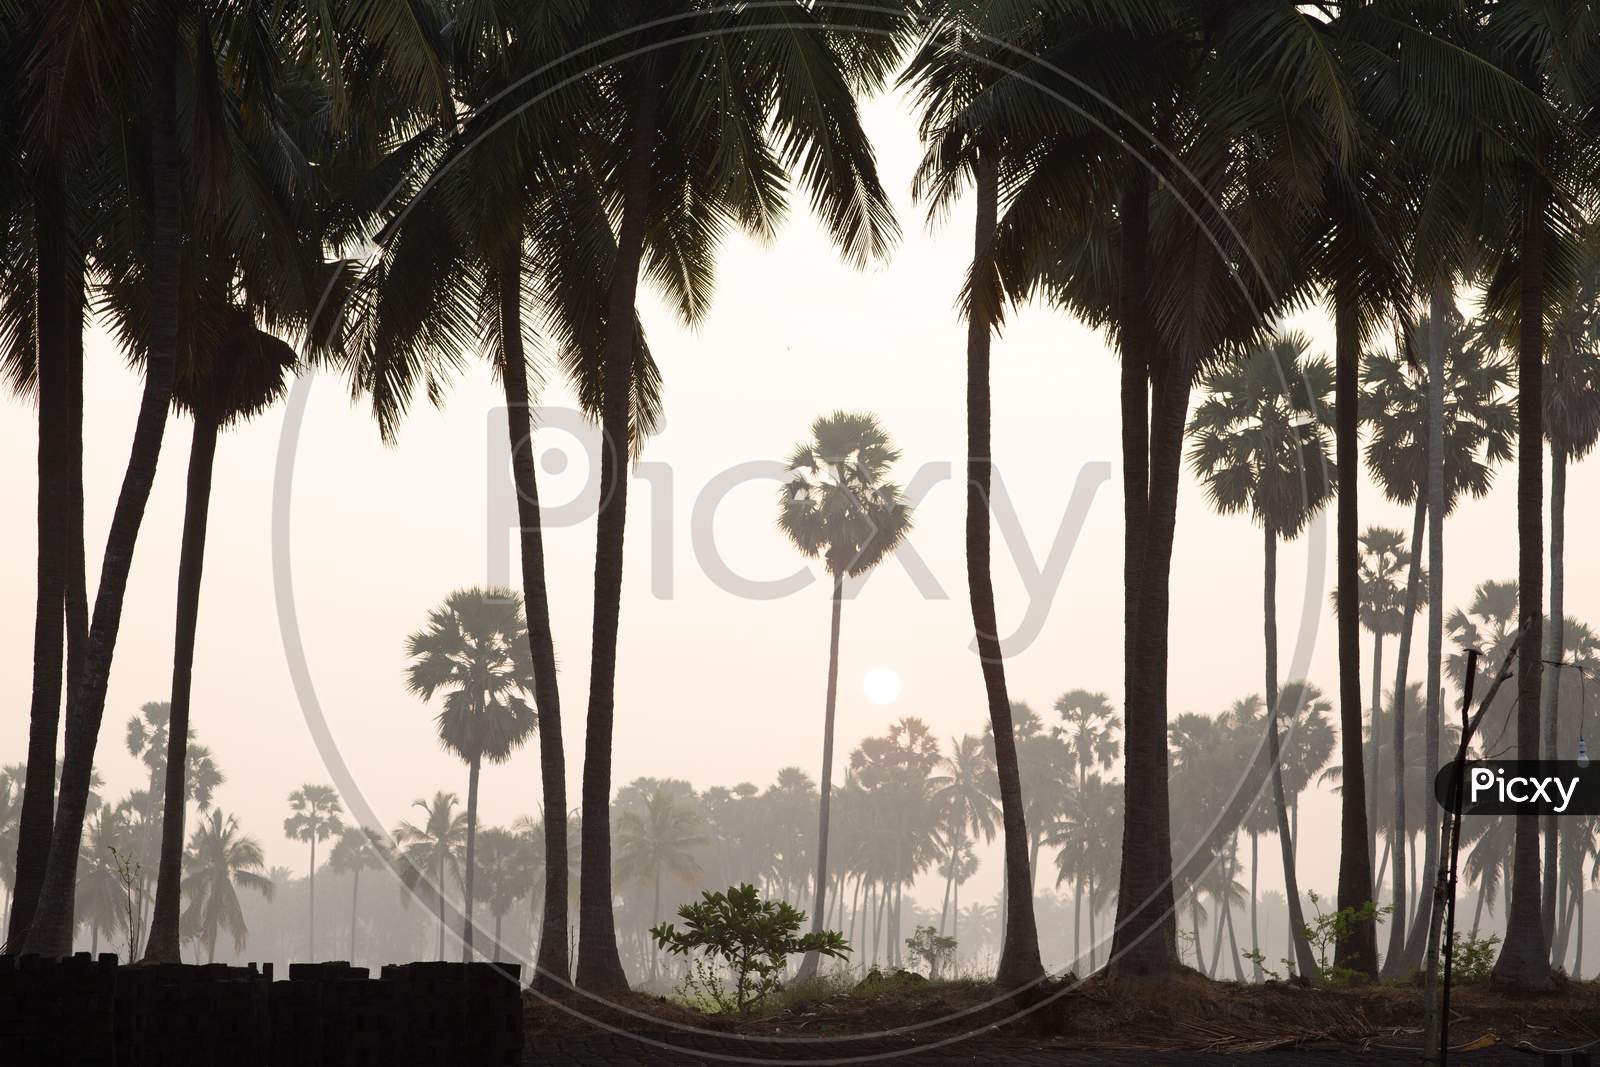 Landscape of palm trees covered in fog